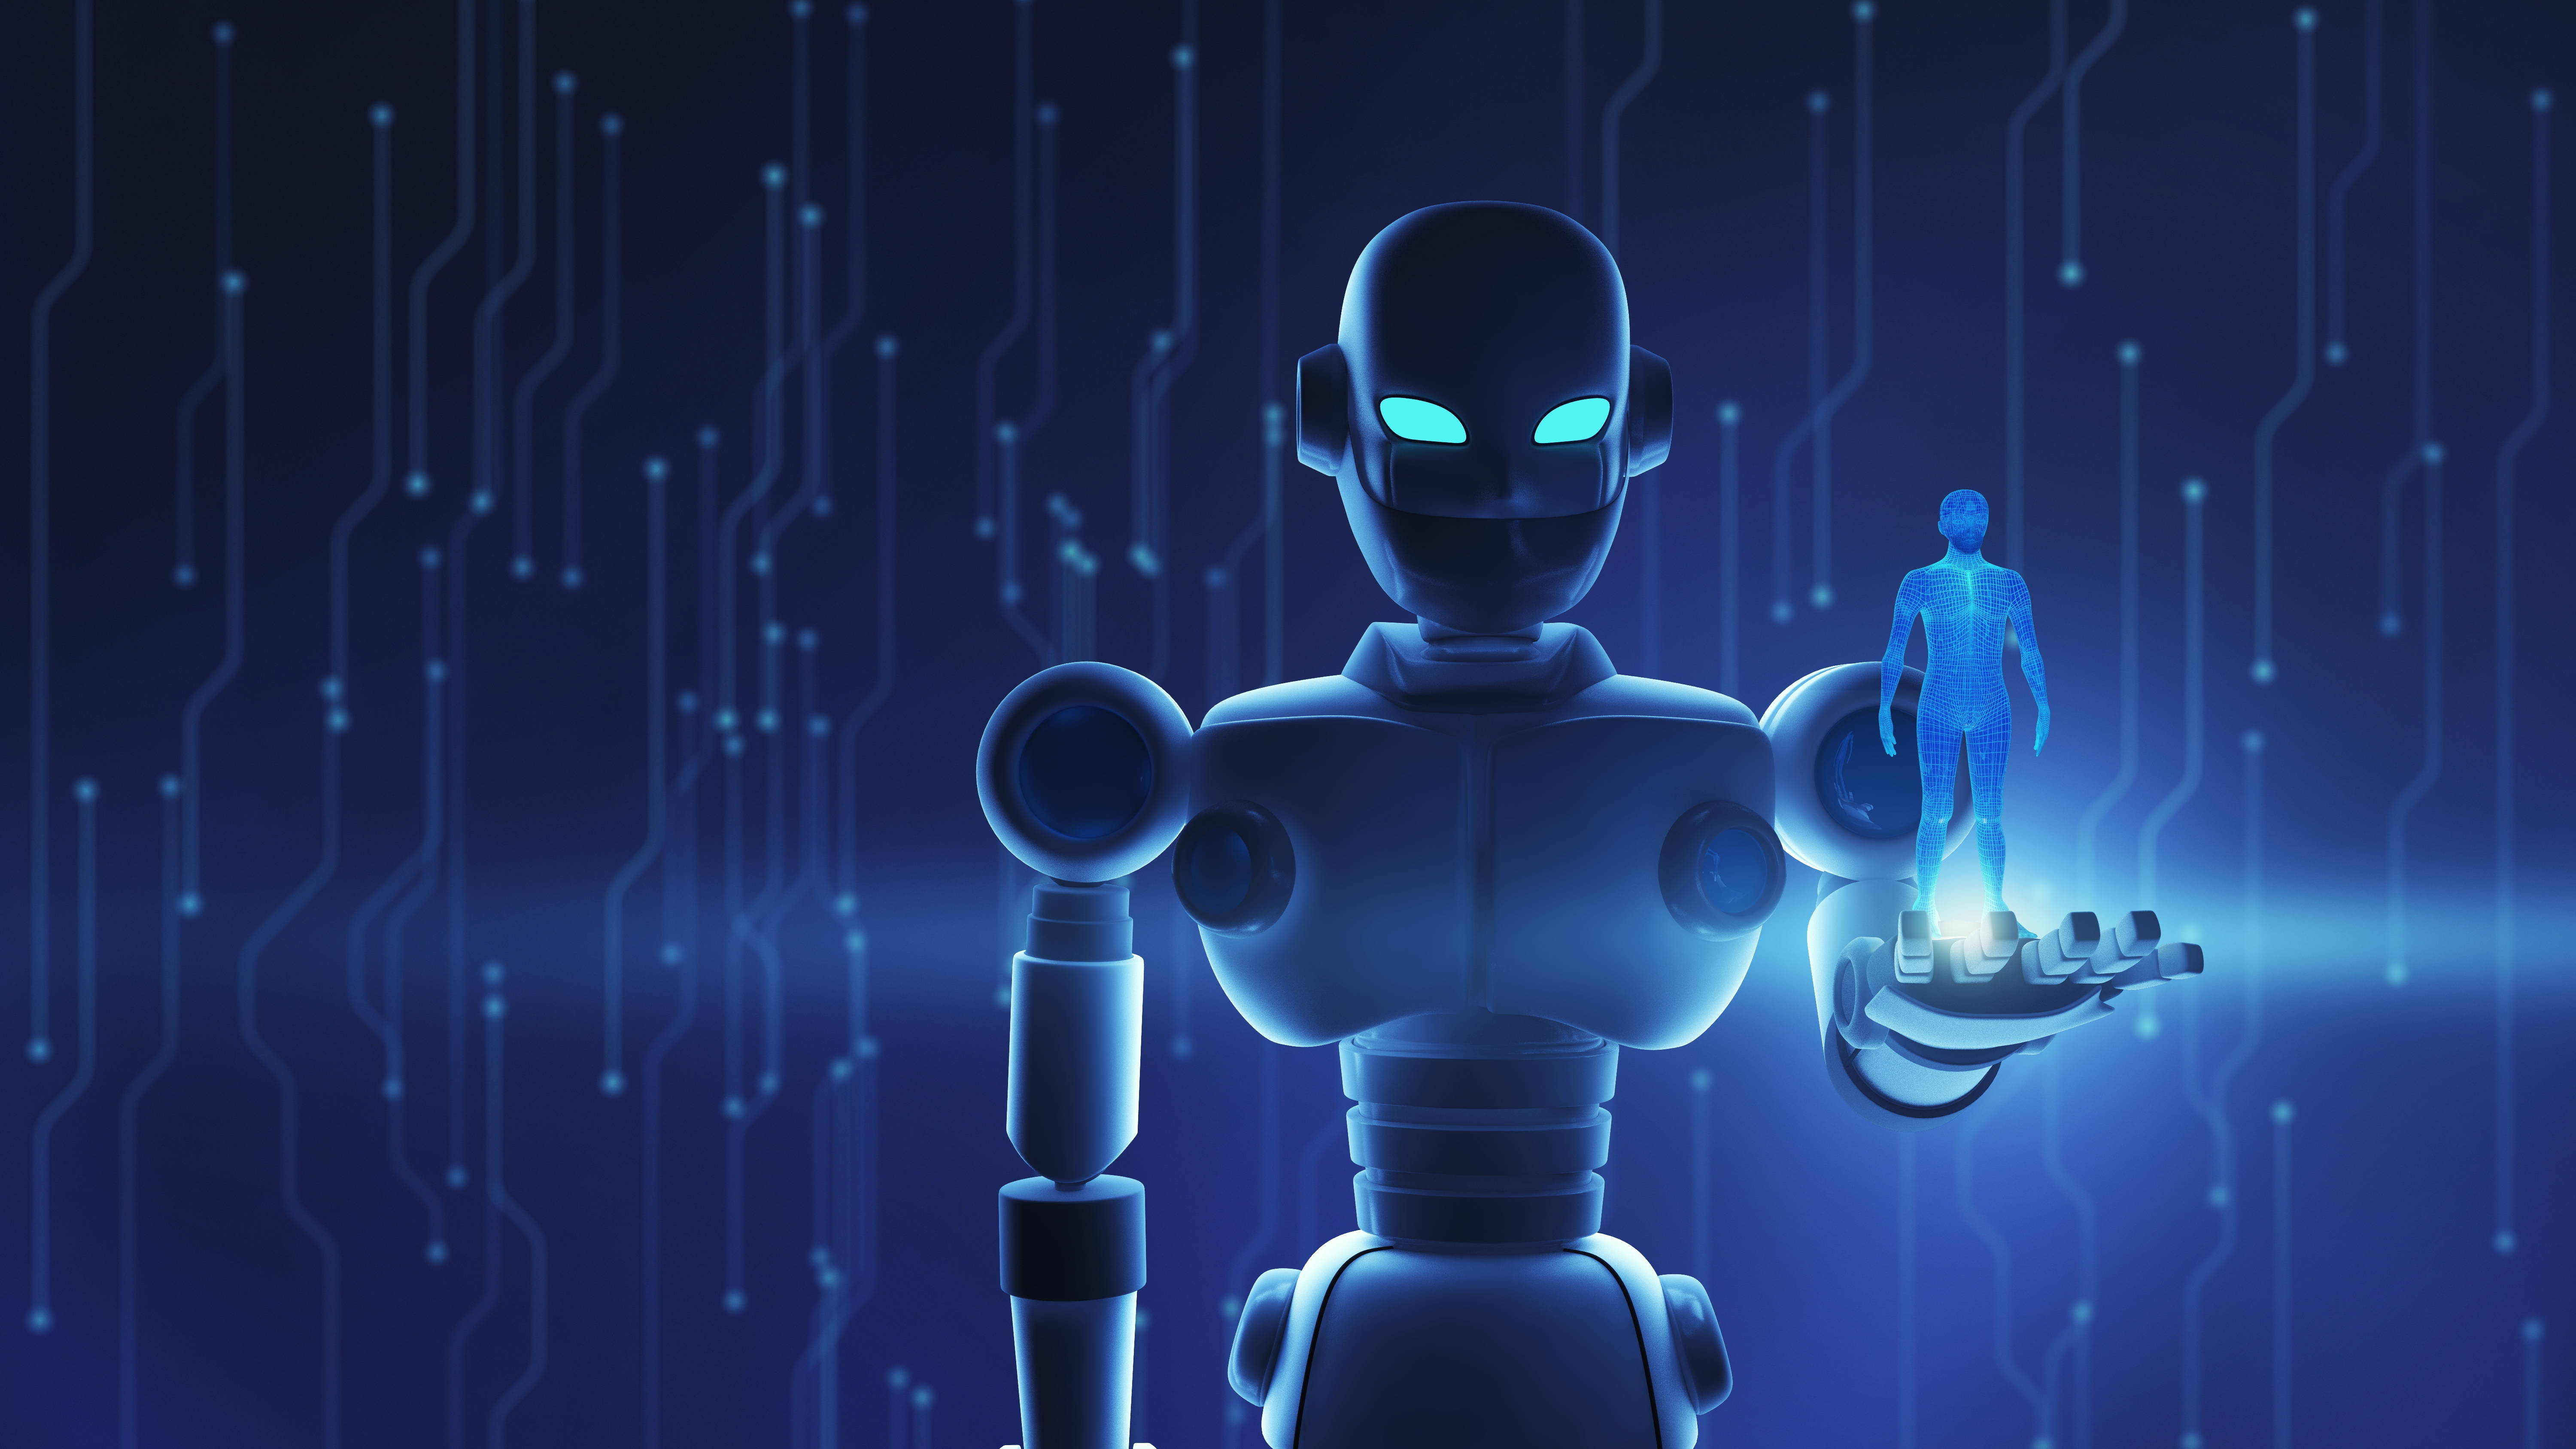 Robot holding human in virtual display, Artificial intelligence in futuristic technology concept. 3d illustration